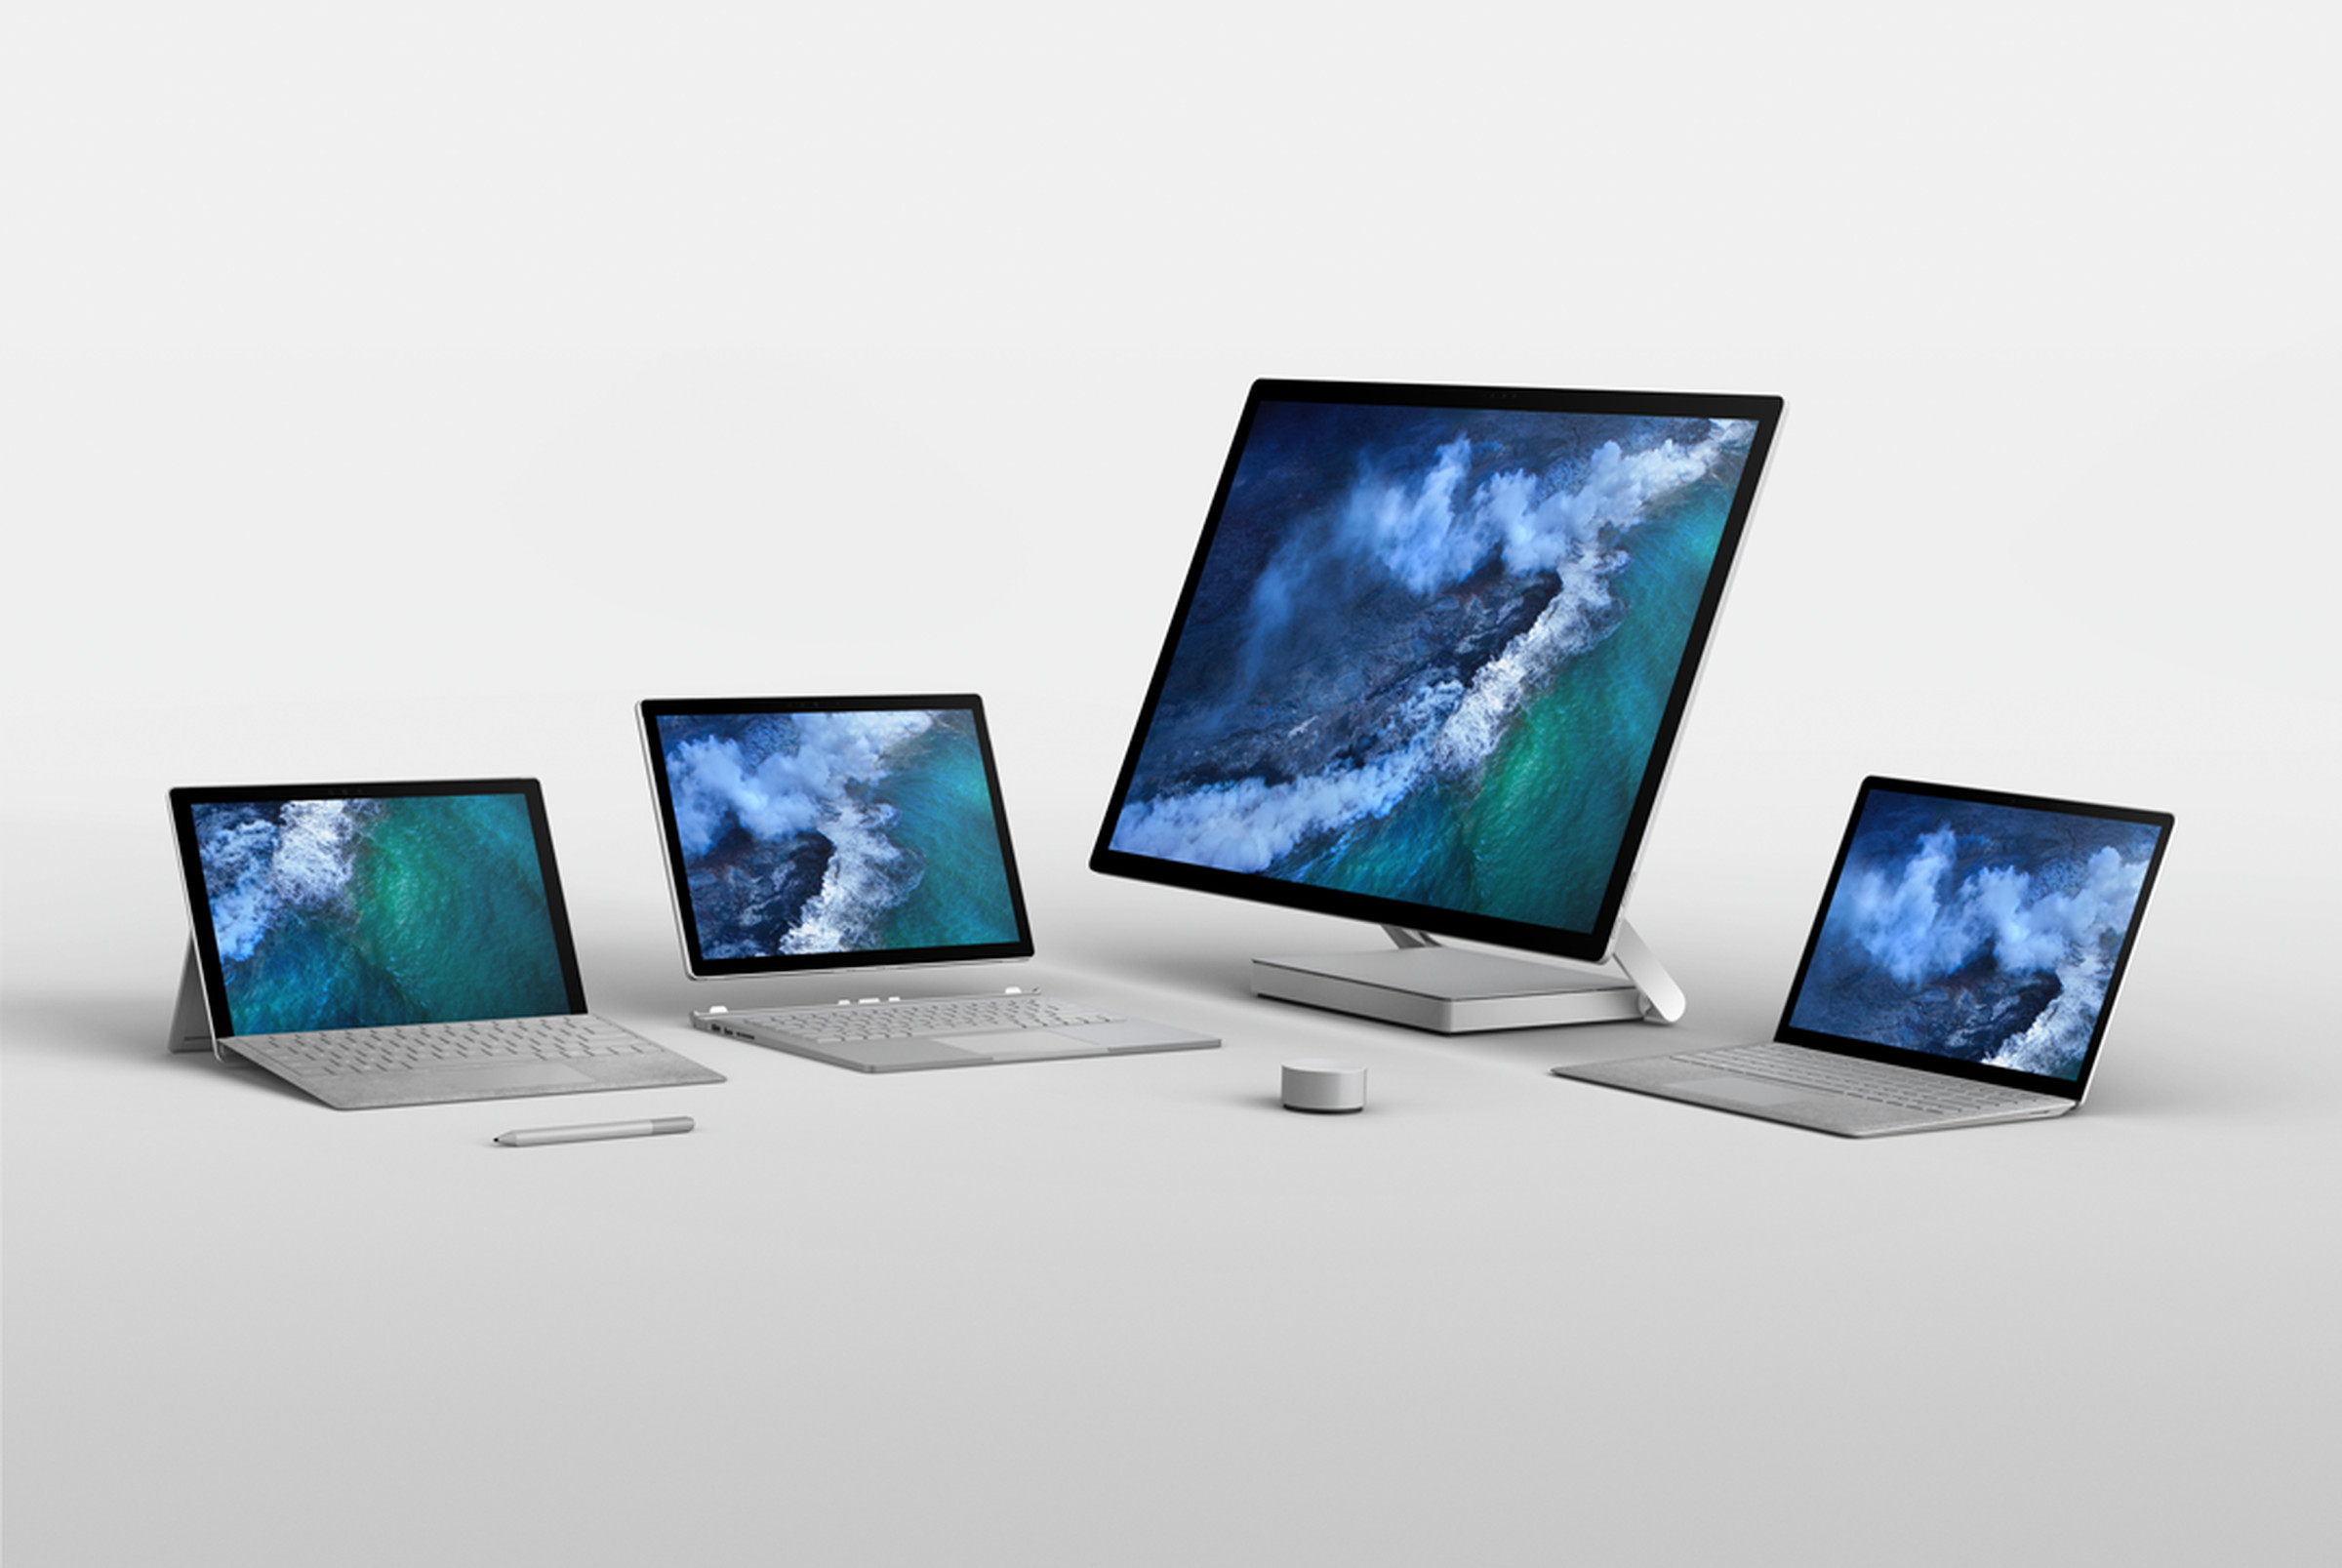 Microsoft’s Surface family of devices